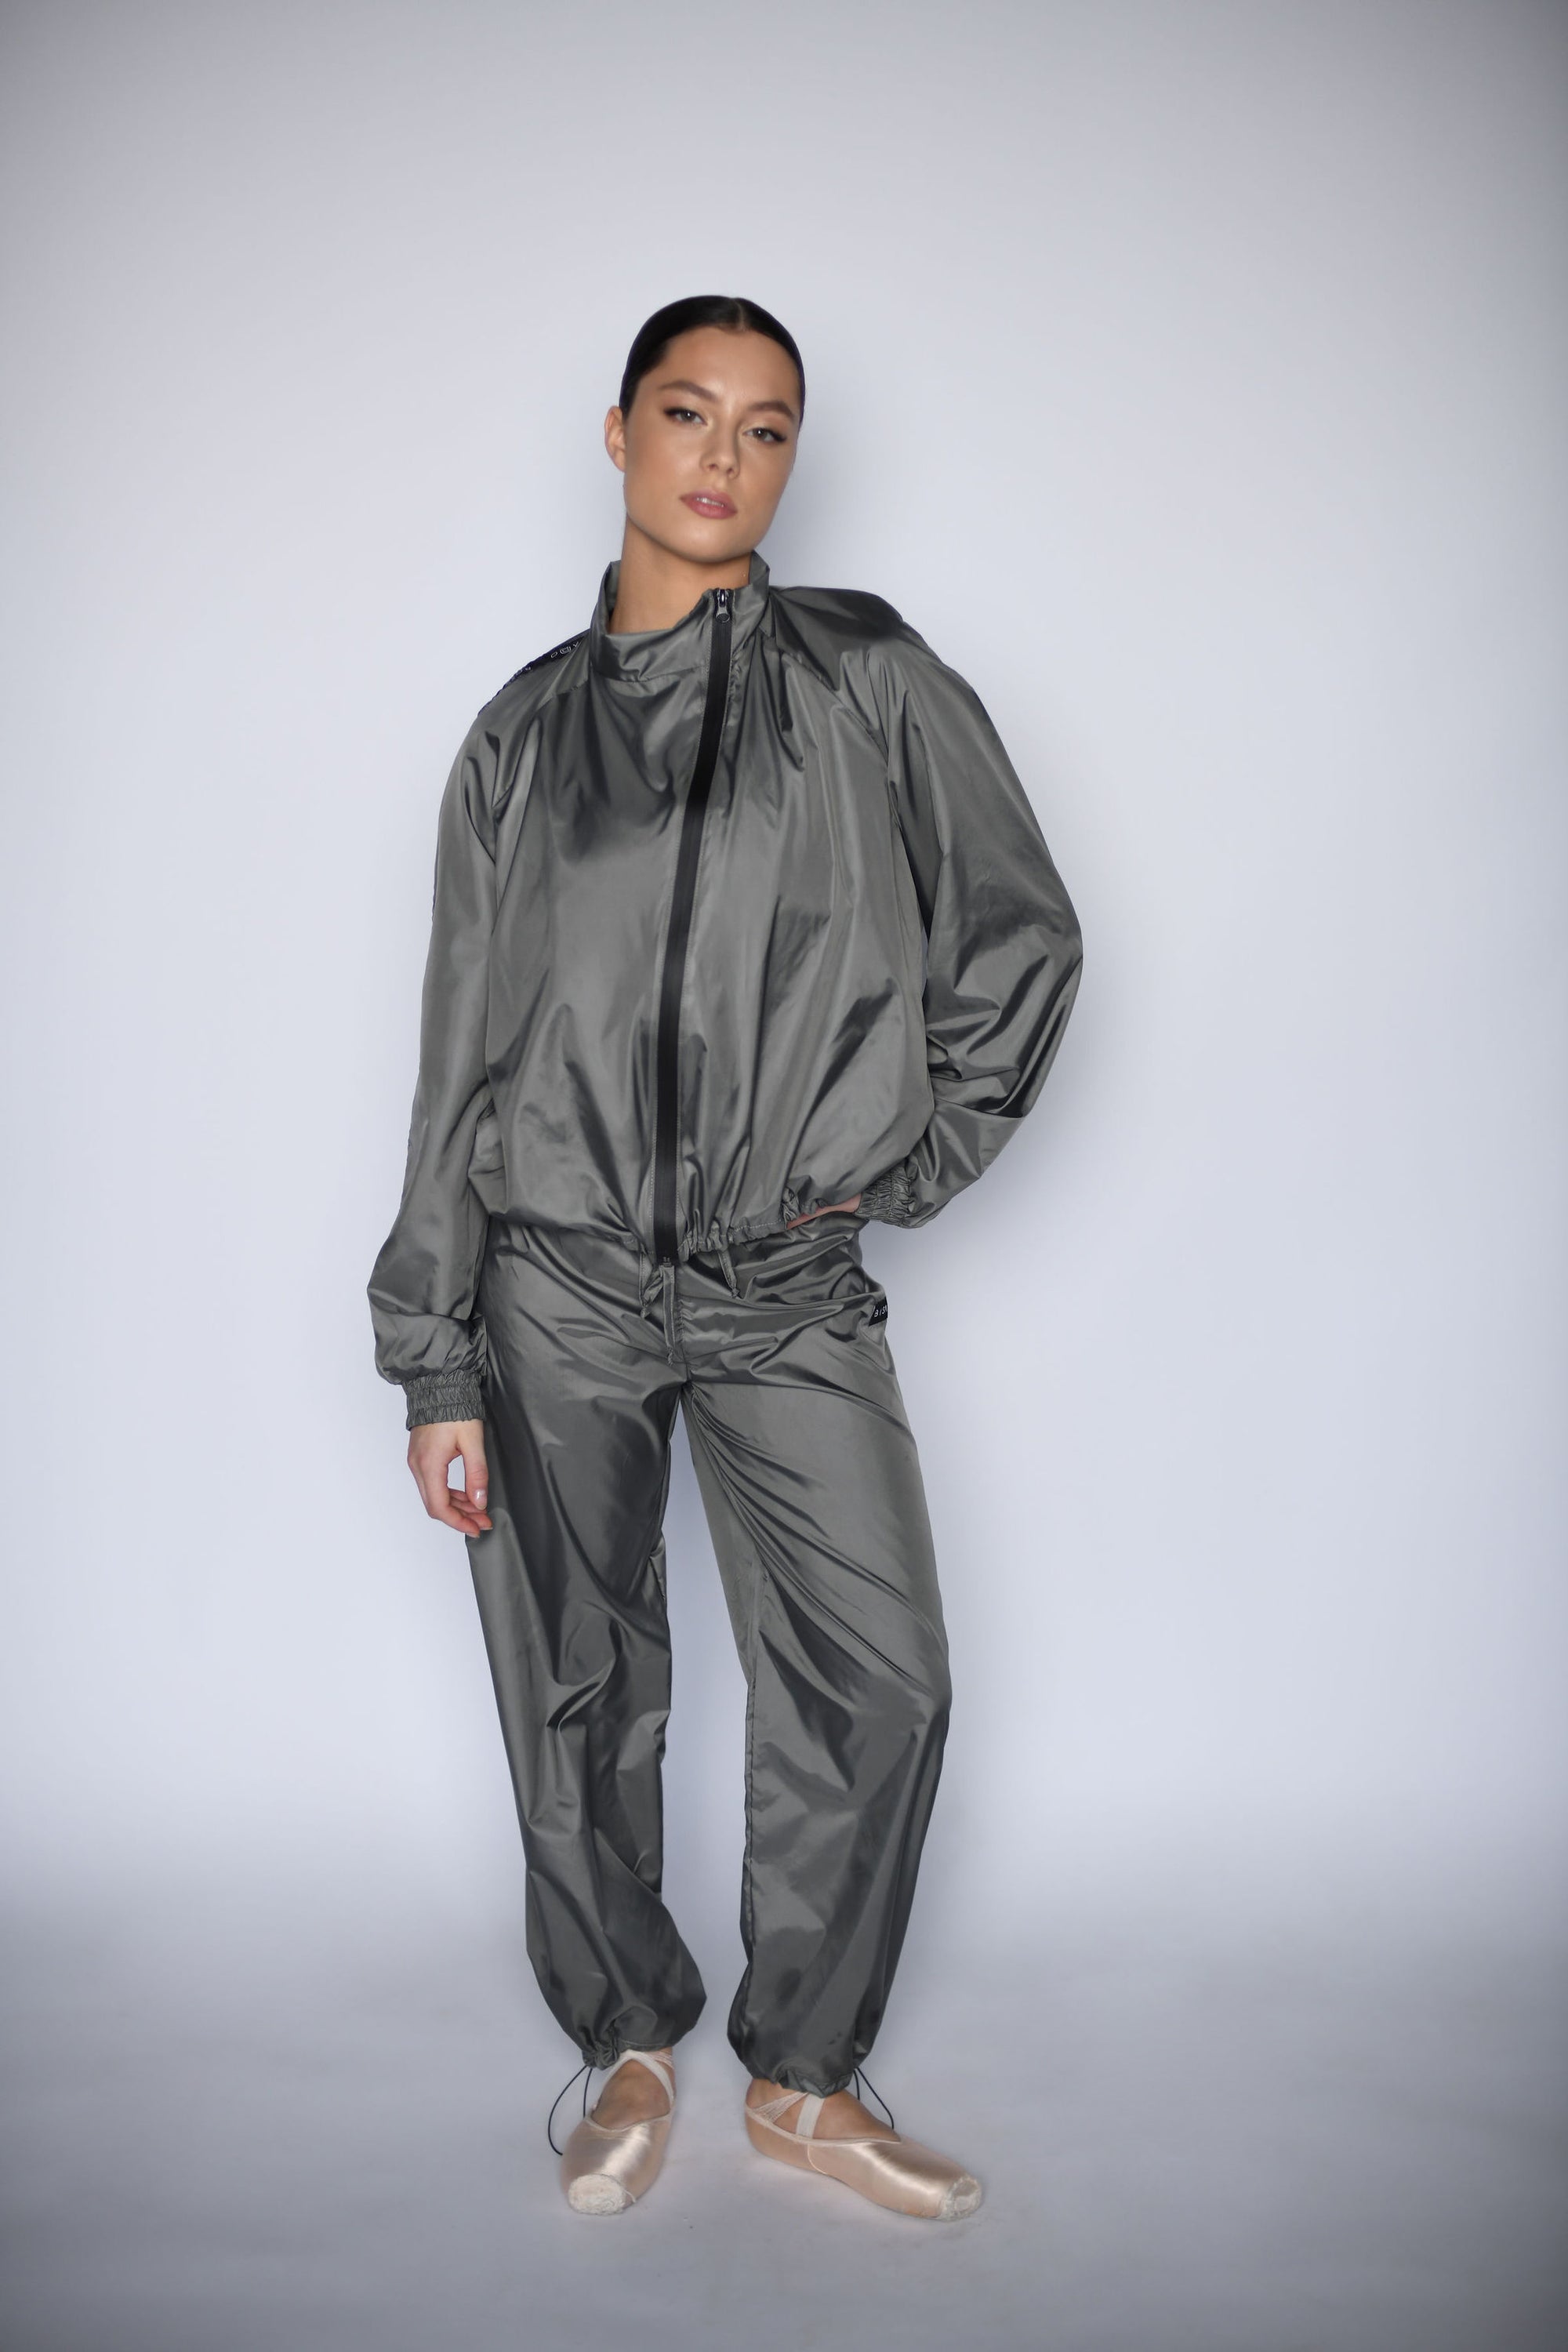 NEW URBAN SWAN COLLECTION S/S 23 | Dark concrete sports suit with pants + shorts